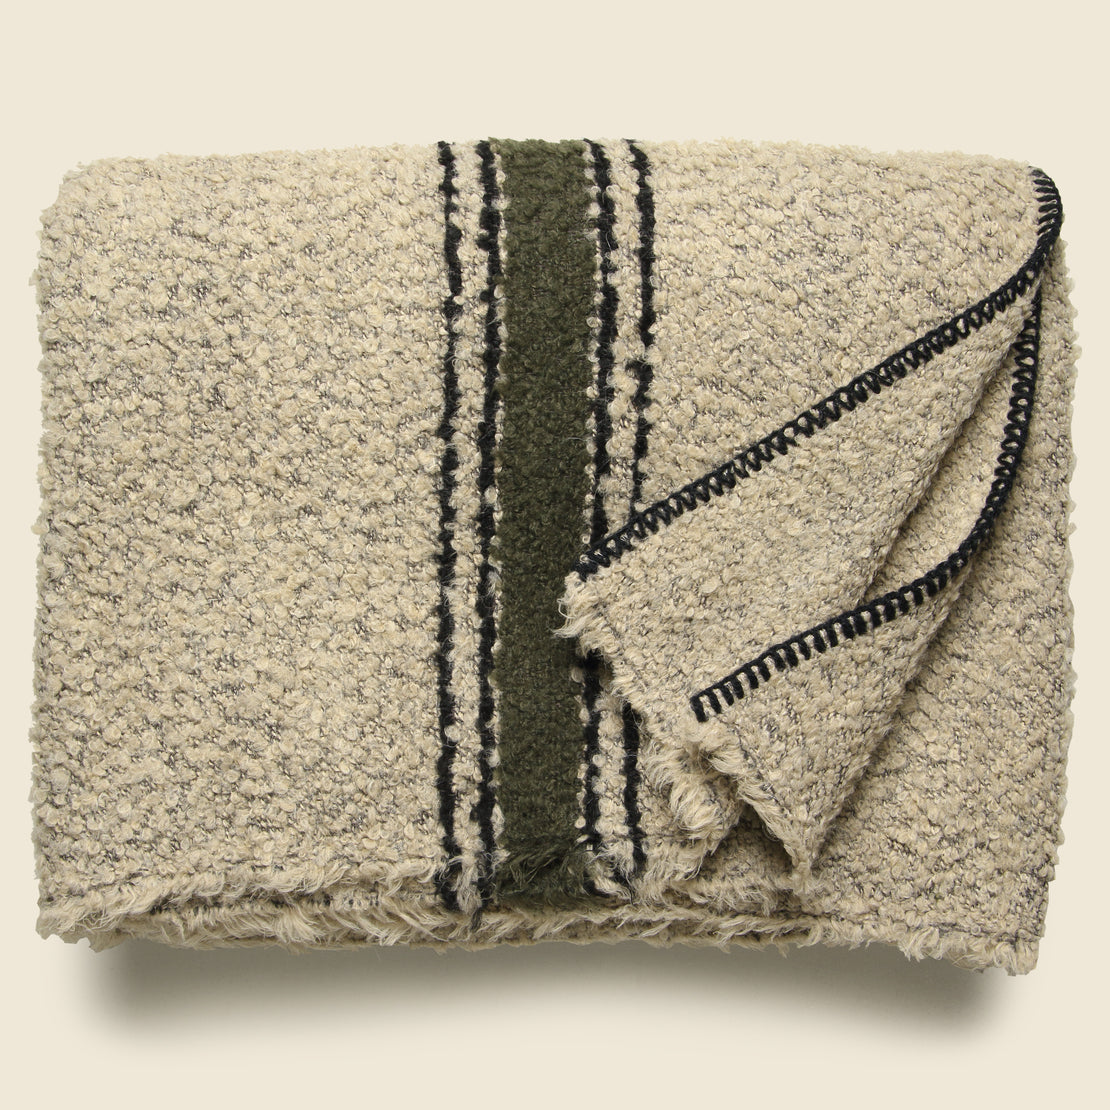 Riverton Throw Blanket - Natural/Khaki - Home - STAG Provisions - Home - Bed - Blanket